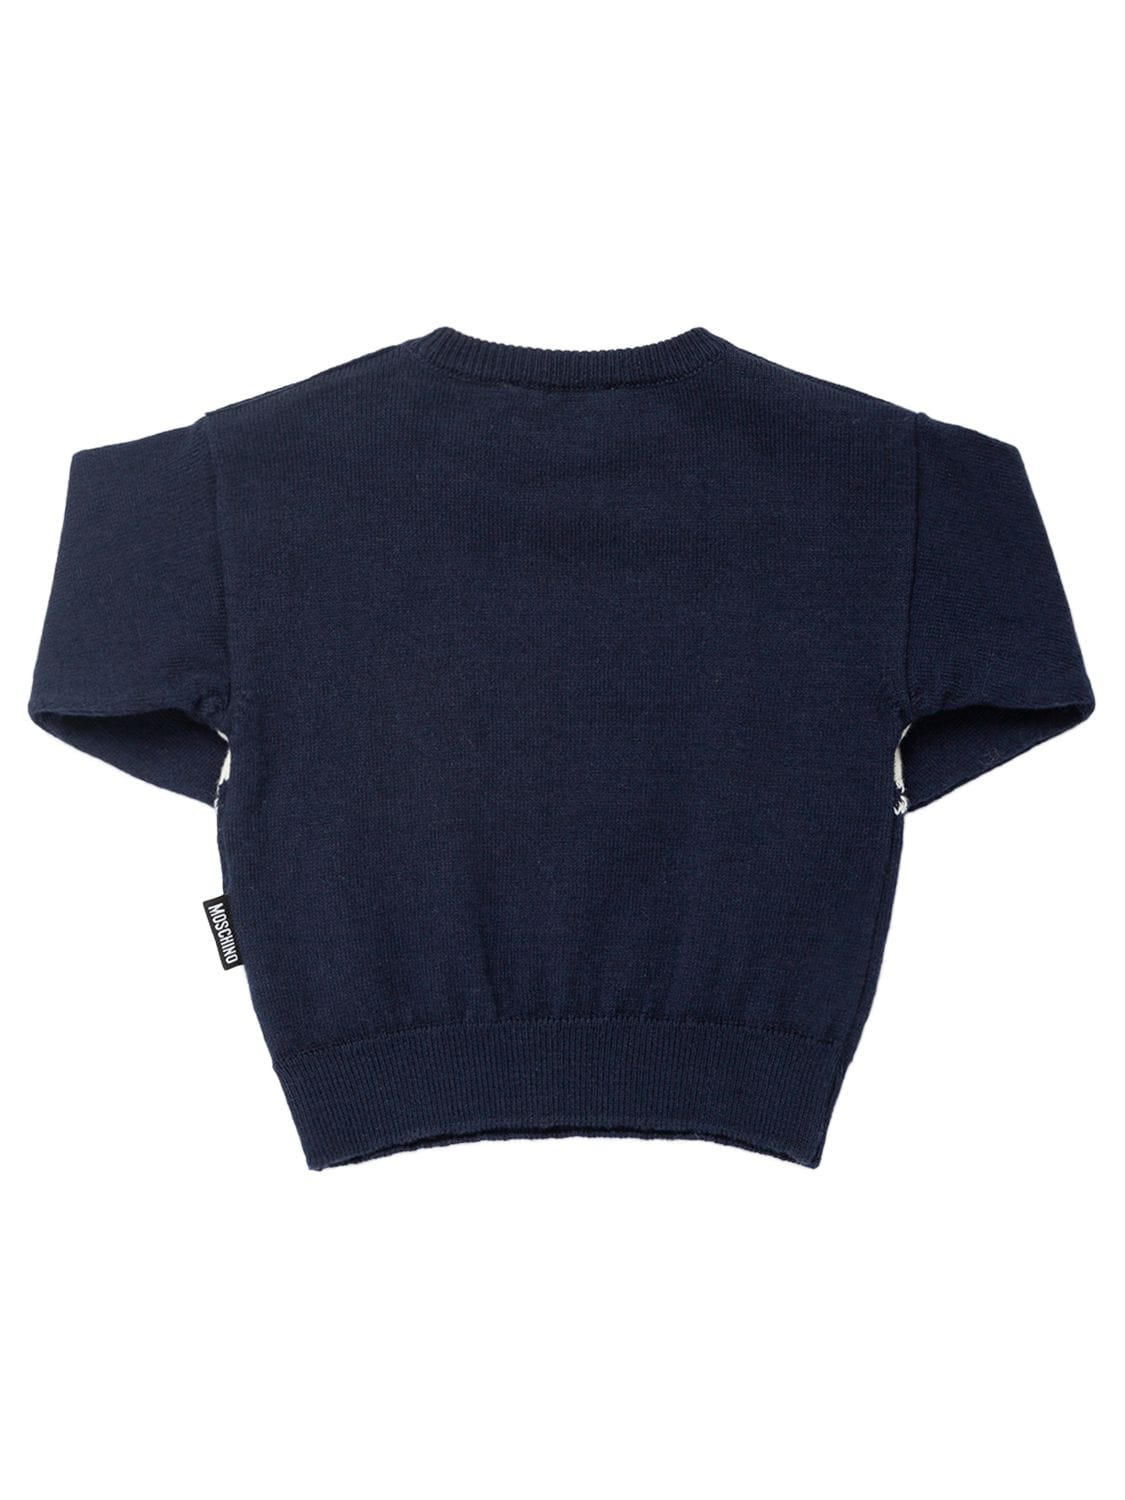 Shop Moschino Wool & Cotton Jacquard Knit Sweater In Navy